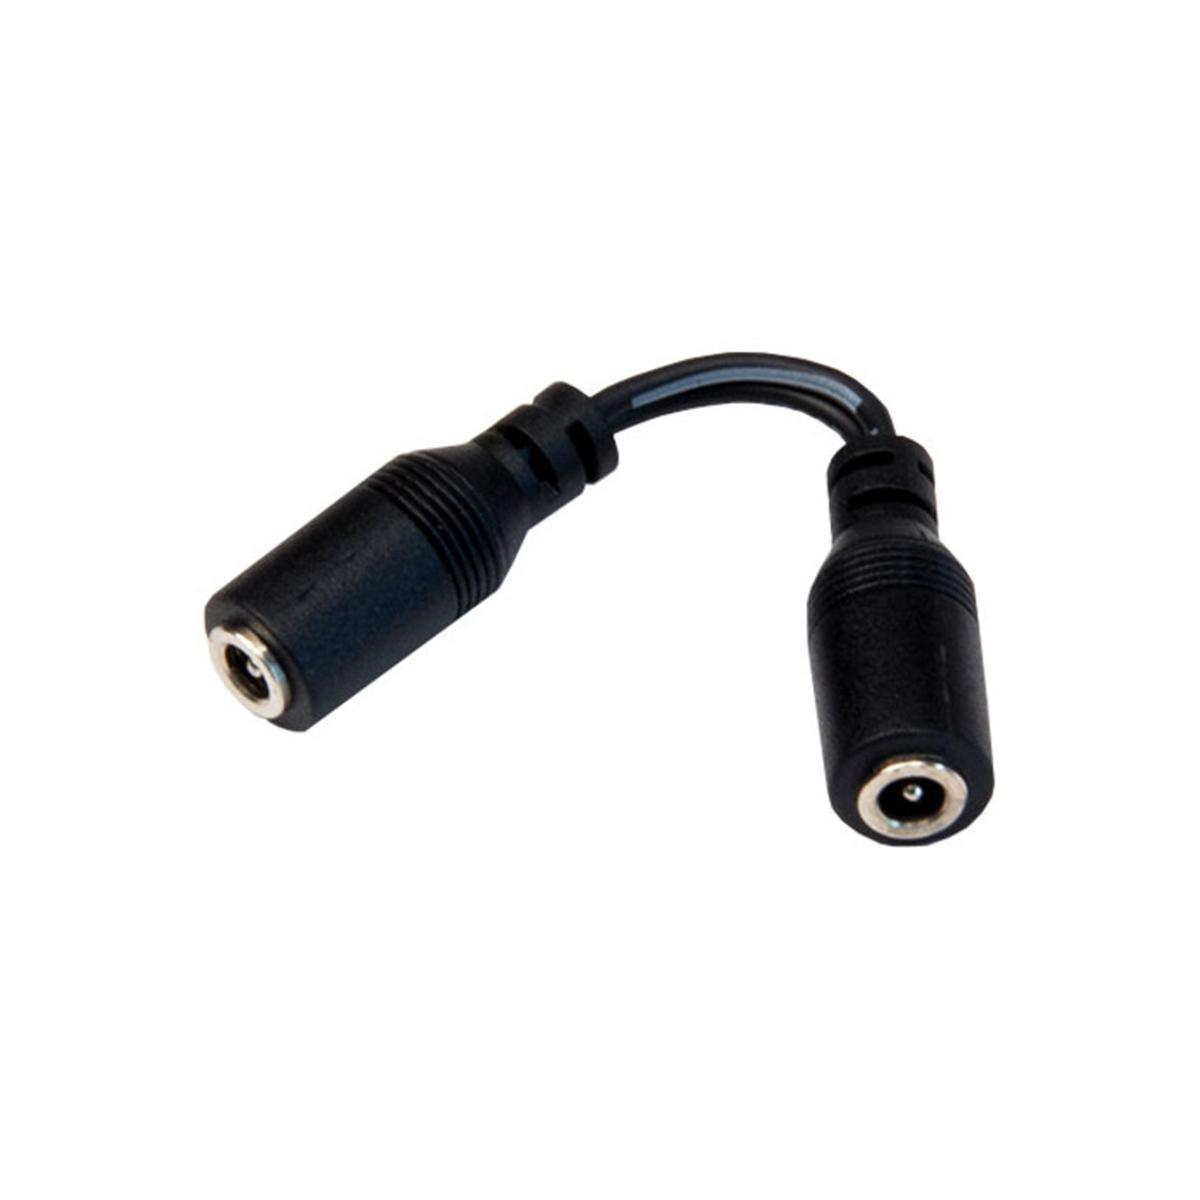 3in. female to female Cable Connector For GM Under Cabinet Lighting, Black